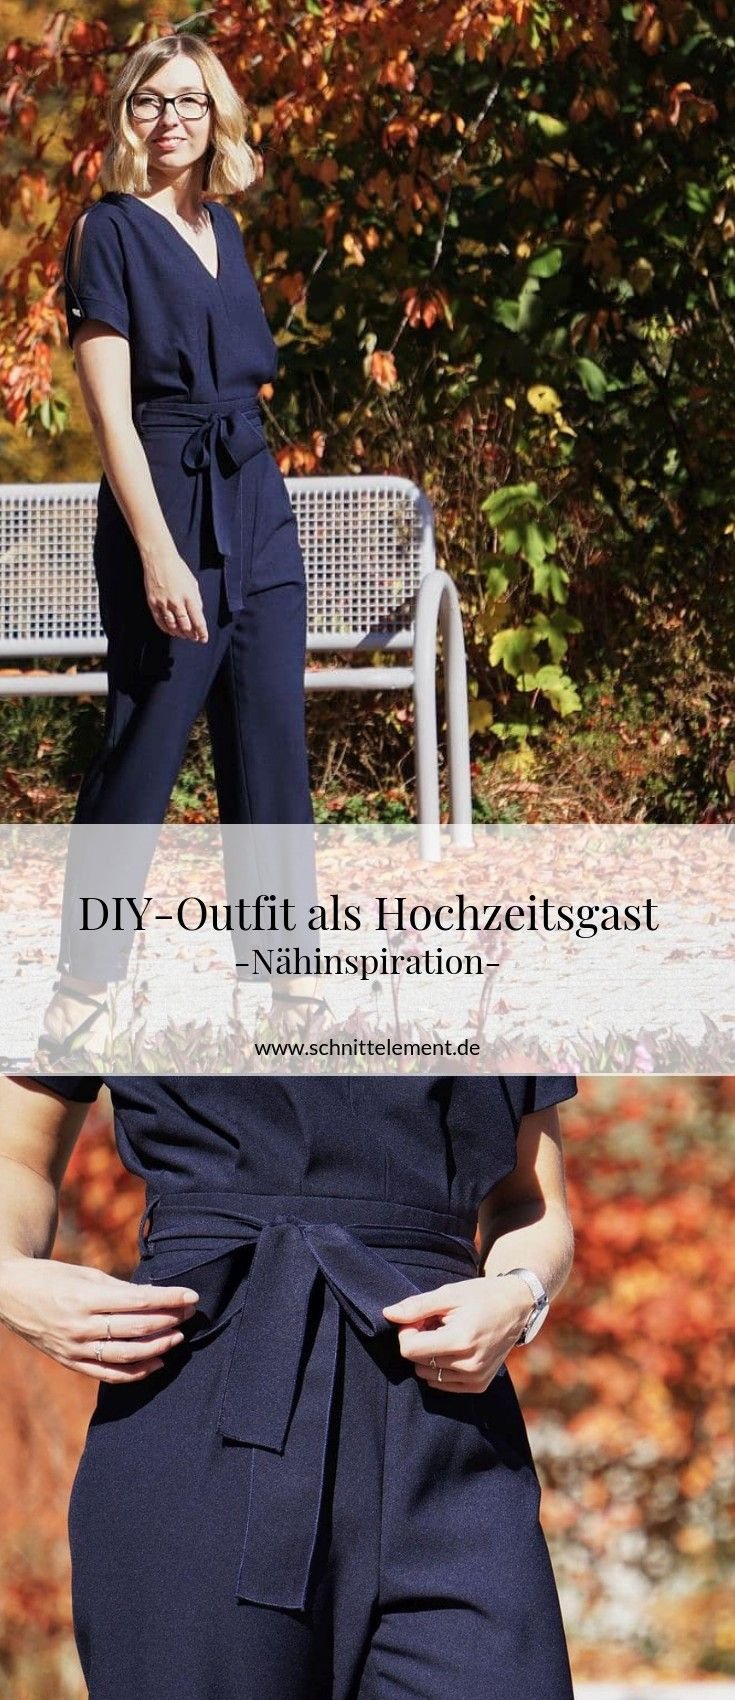 Inspiration Outfit Als Hochzeitsgast  Outfit Diy